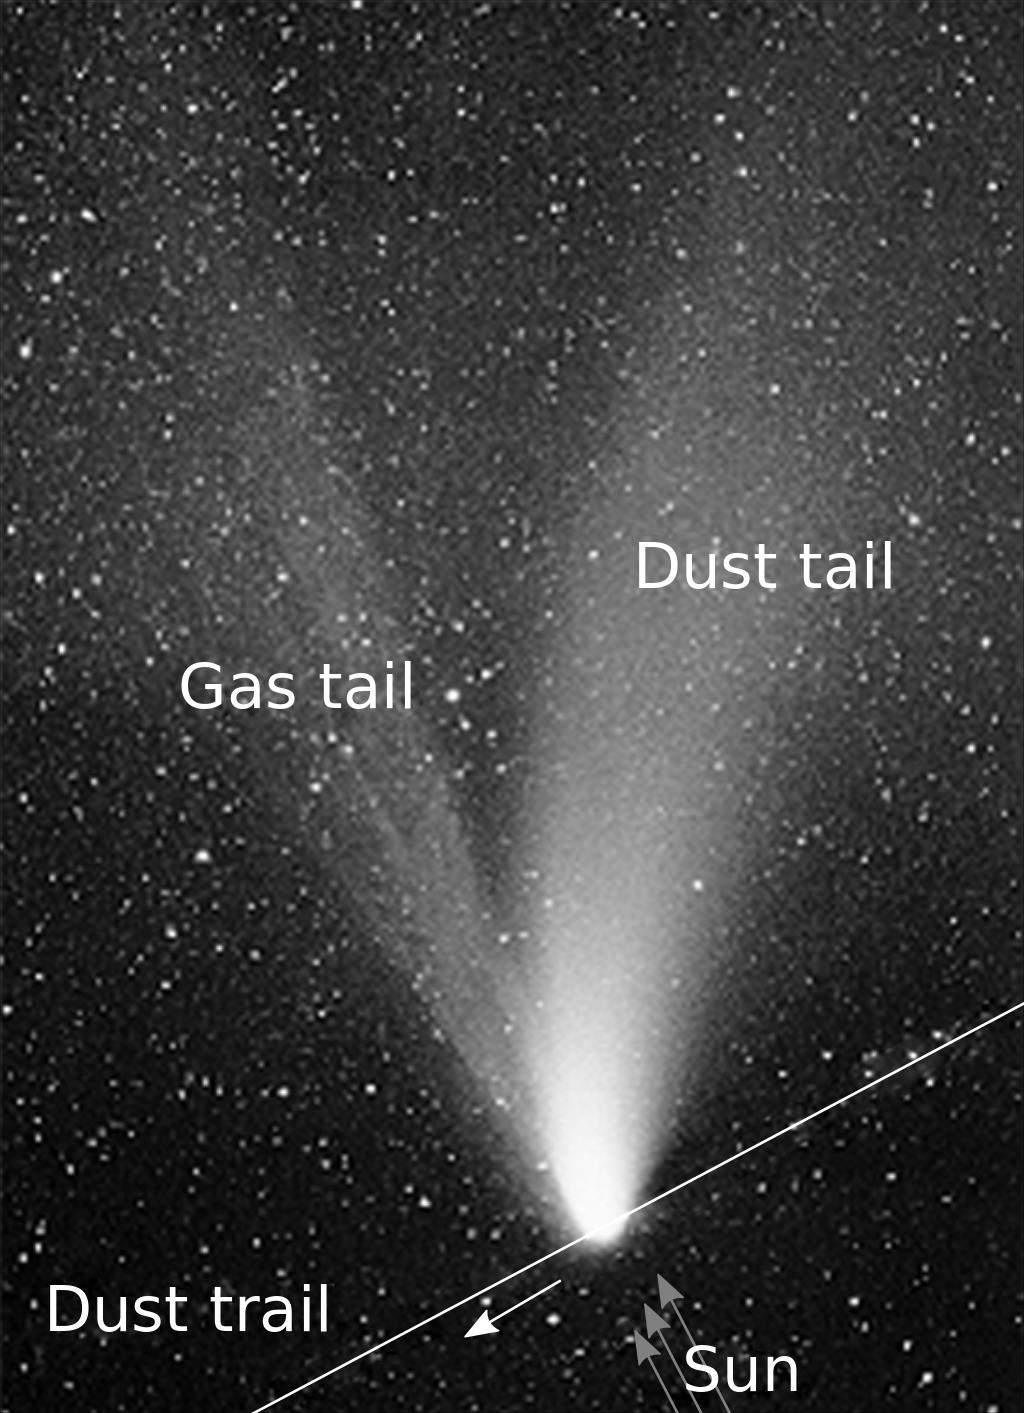 Comet Tail The streams of dust and gas each form their own distinct tail, pointing in slightly different directions.